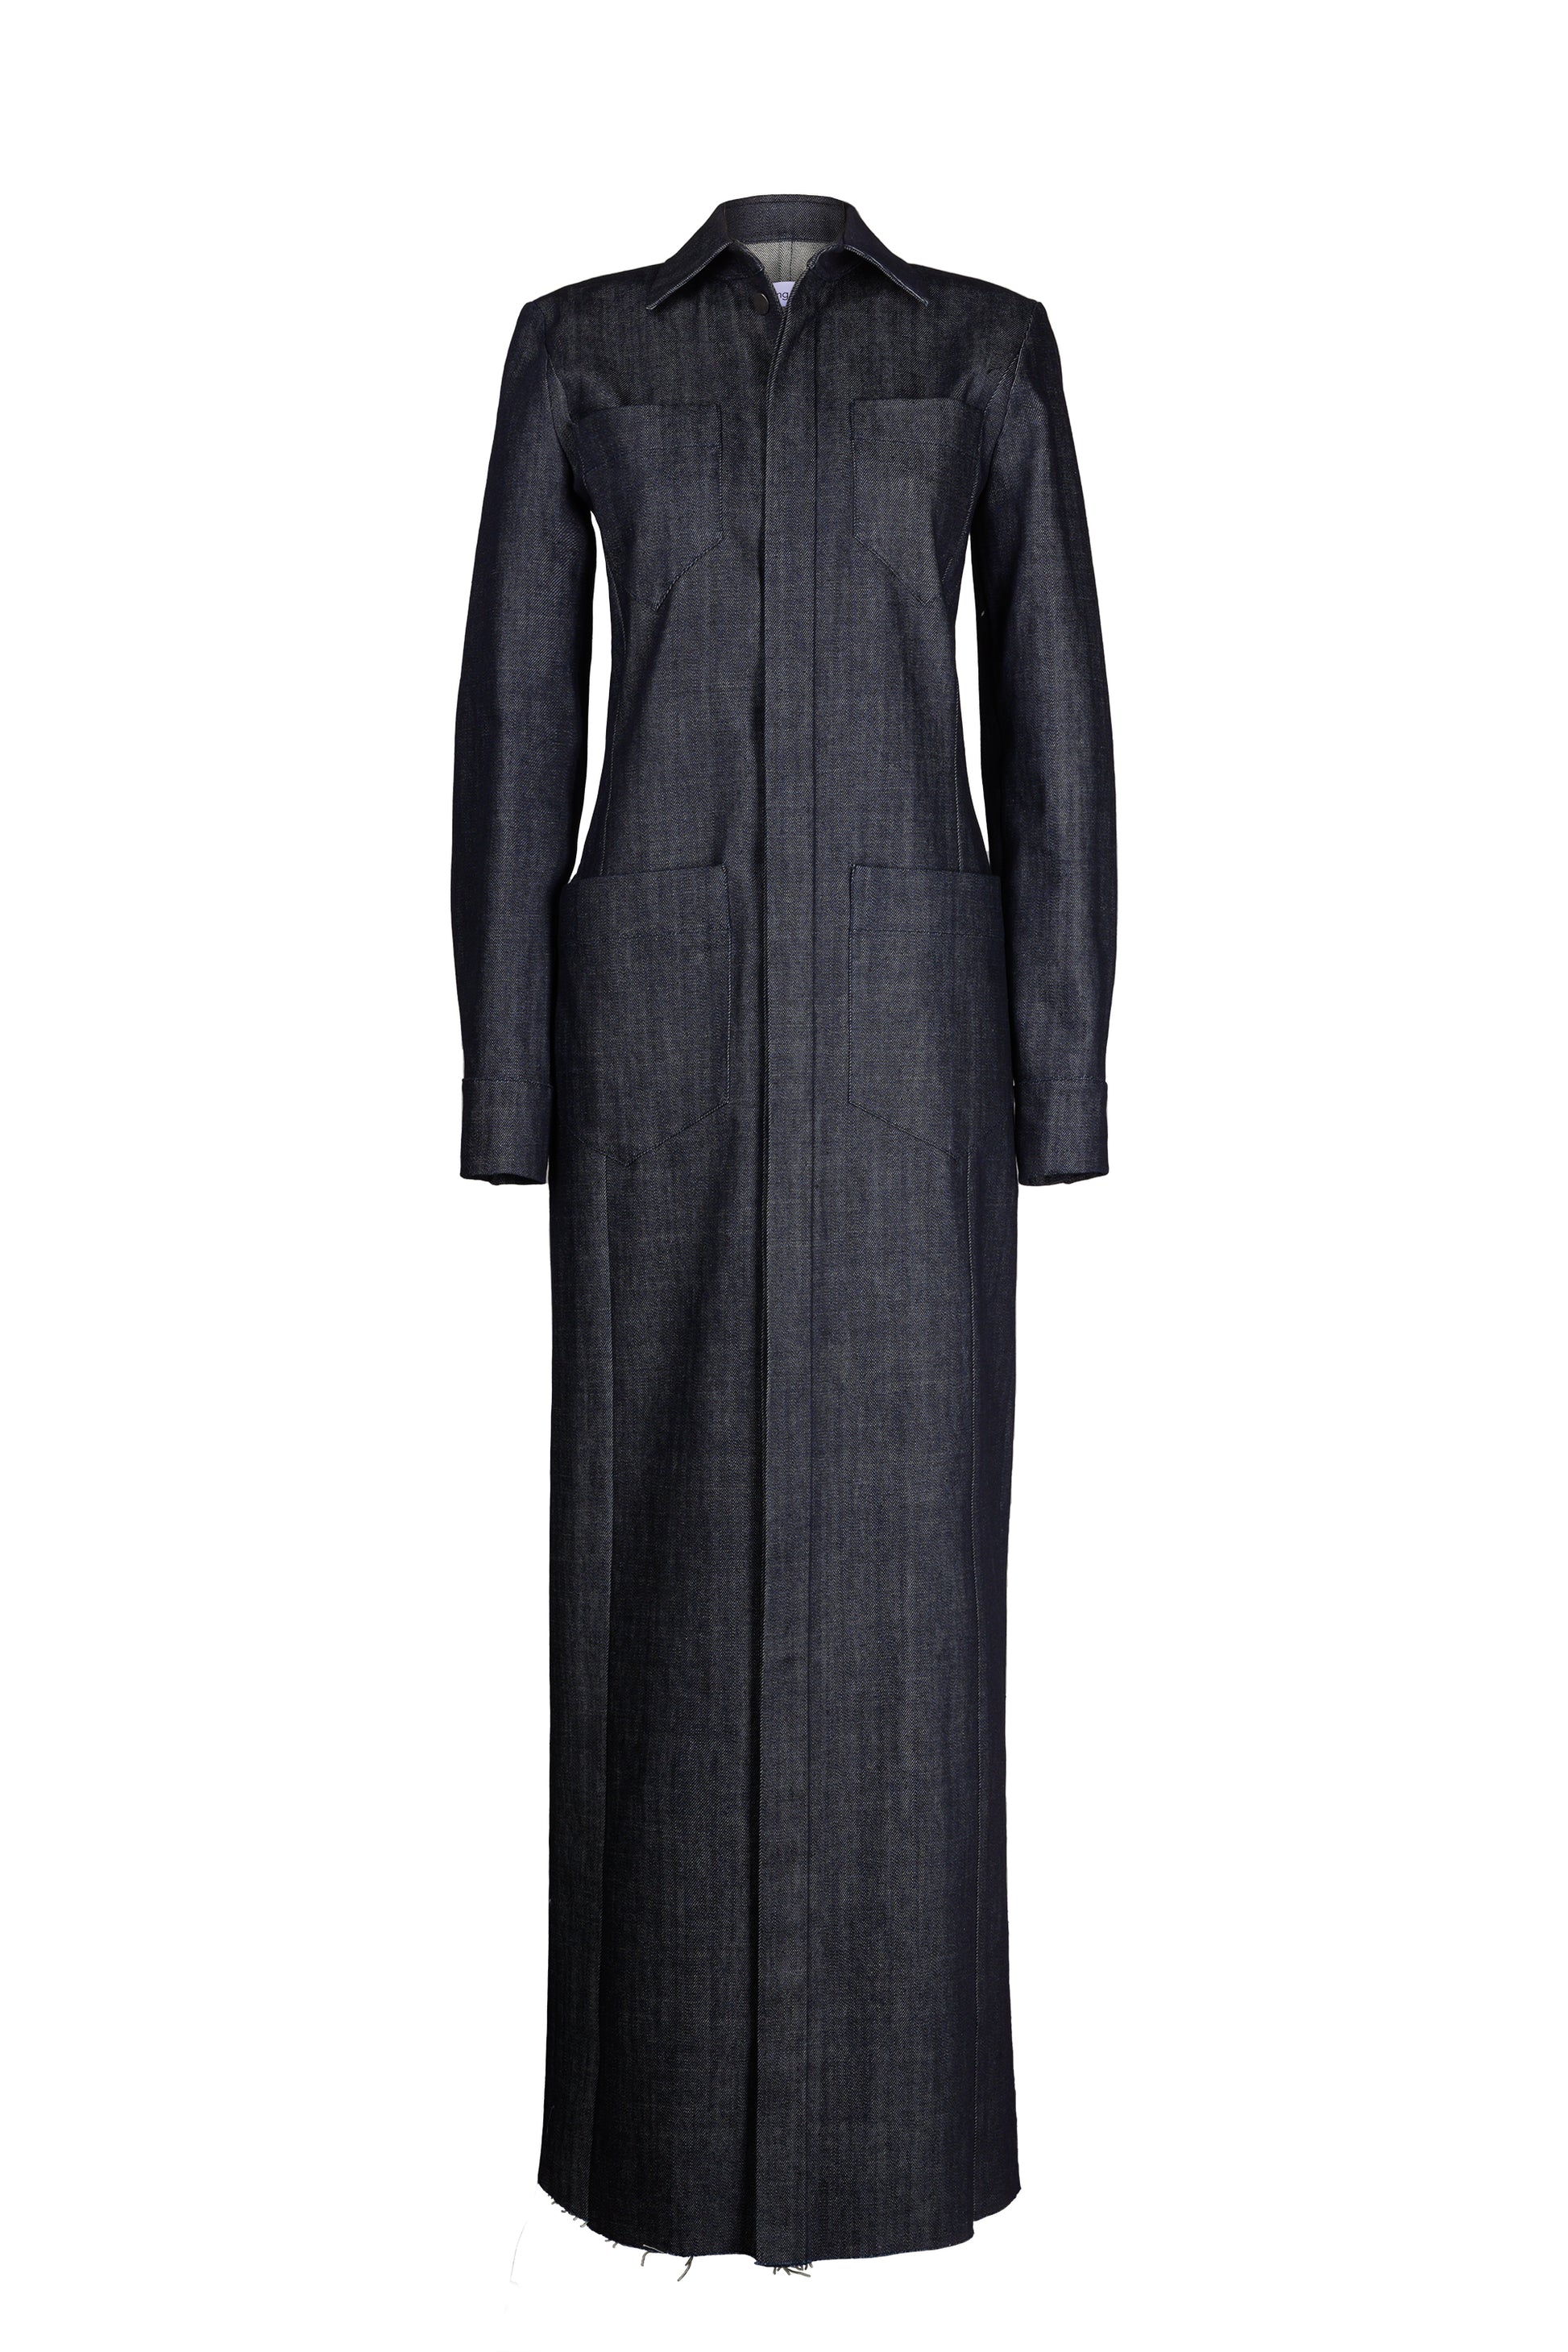 Full-length denim maxi shirt dress with pointed collar, button placket, and side pockets for a stylish yet functional outfit.